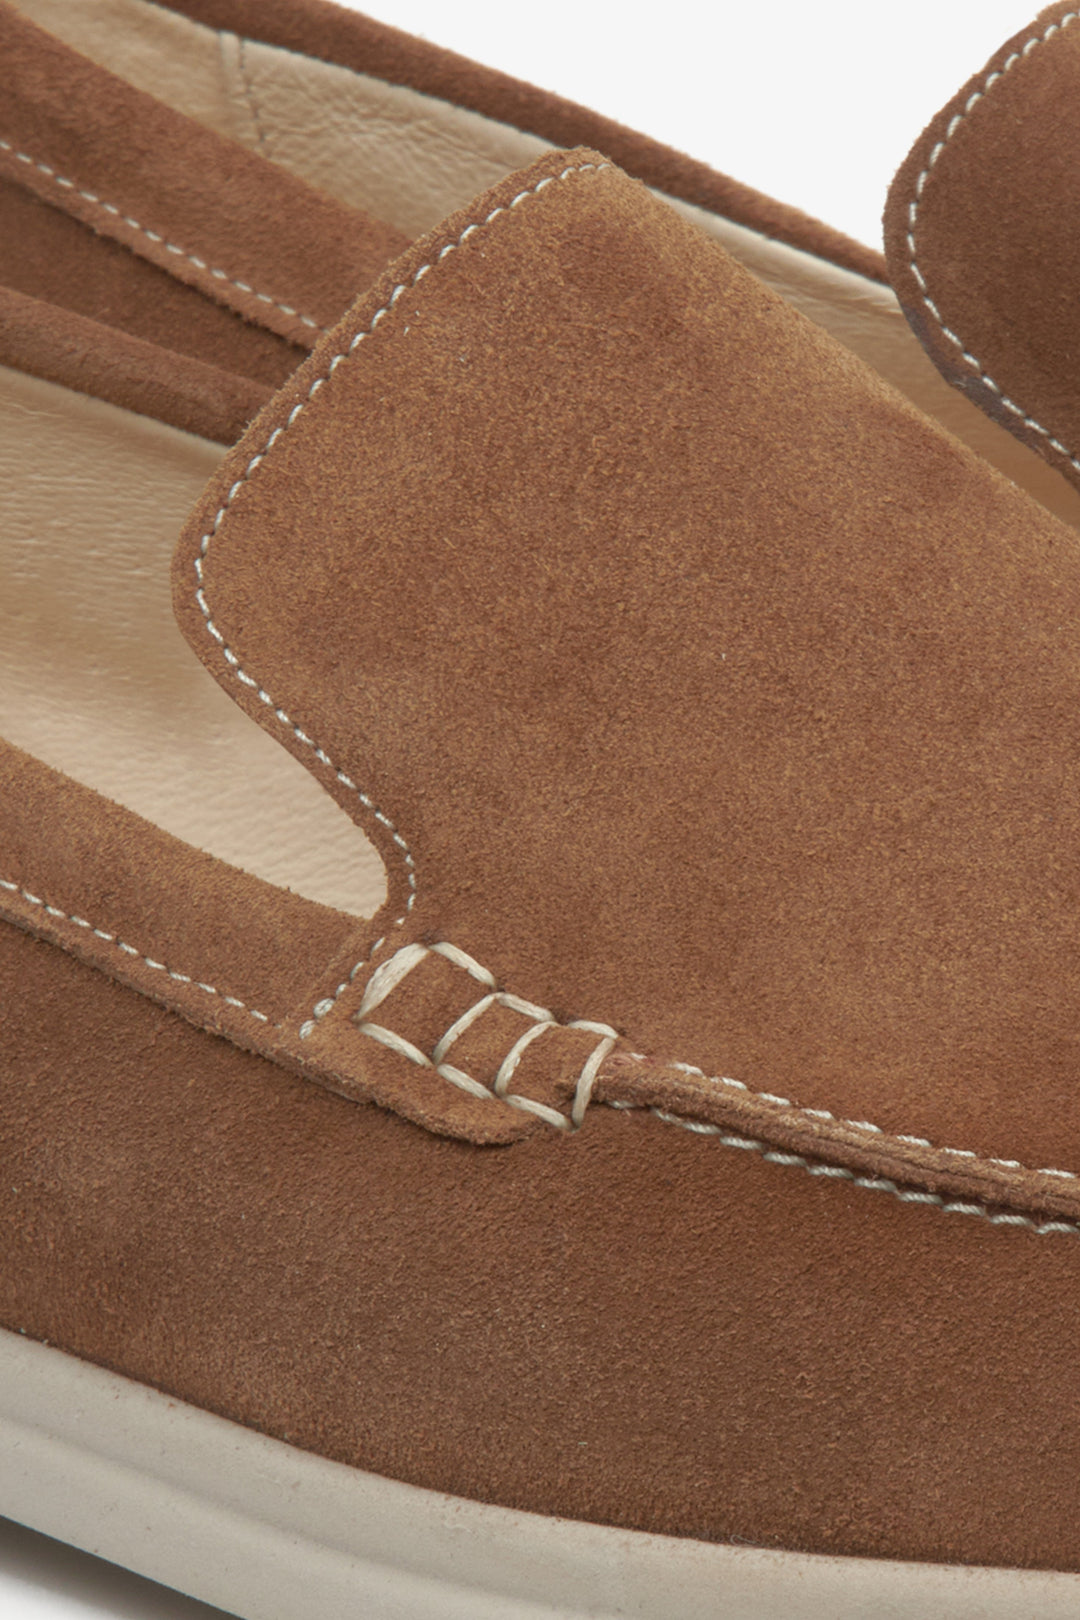 Estro men's natural velvet loafers in brown - close-up of the heel and sideline of the shoes.